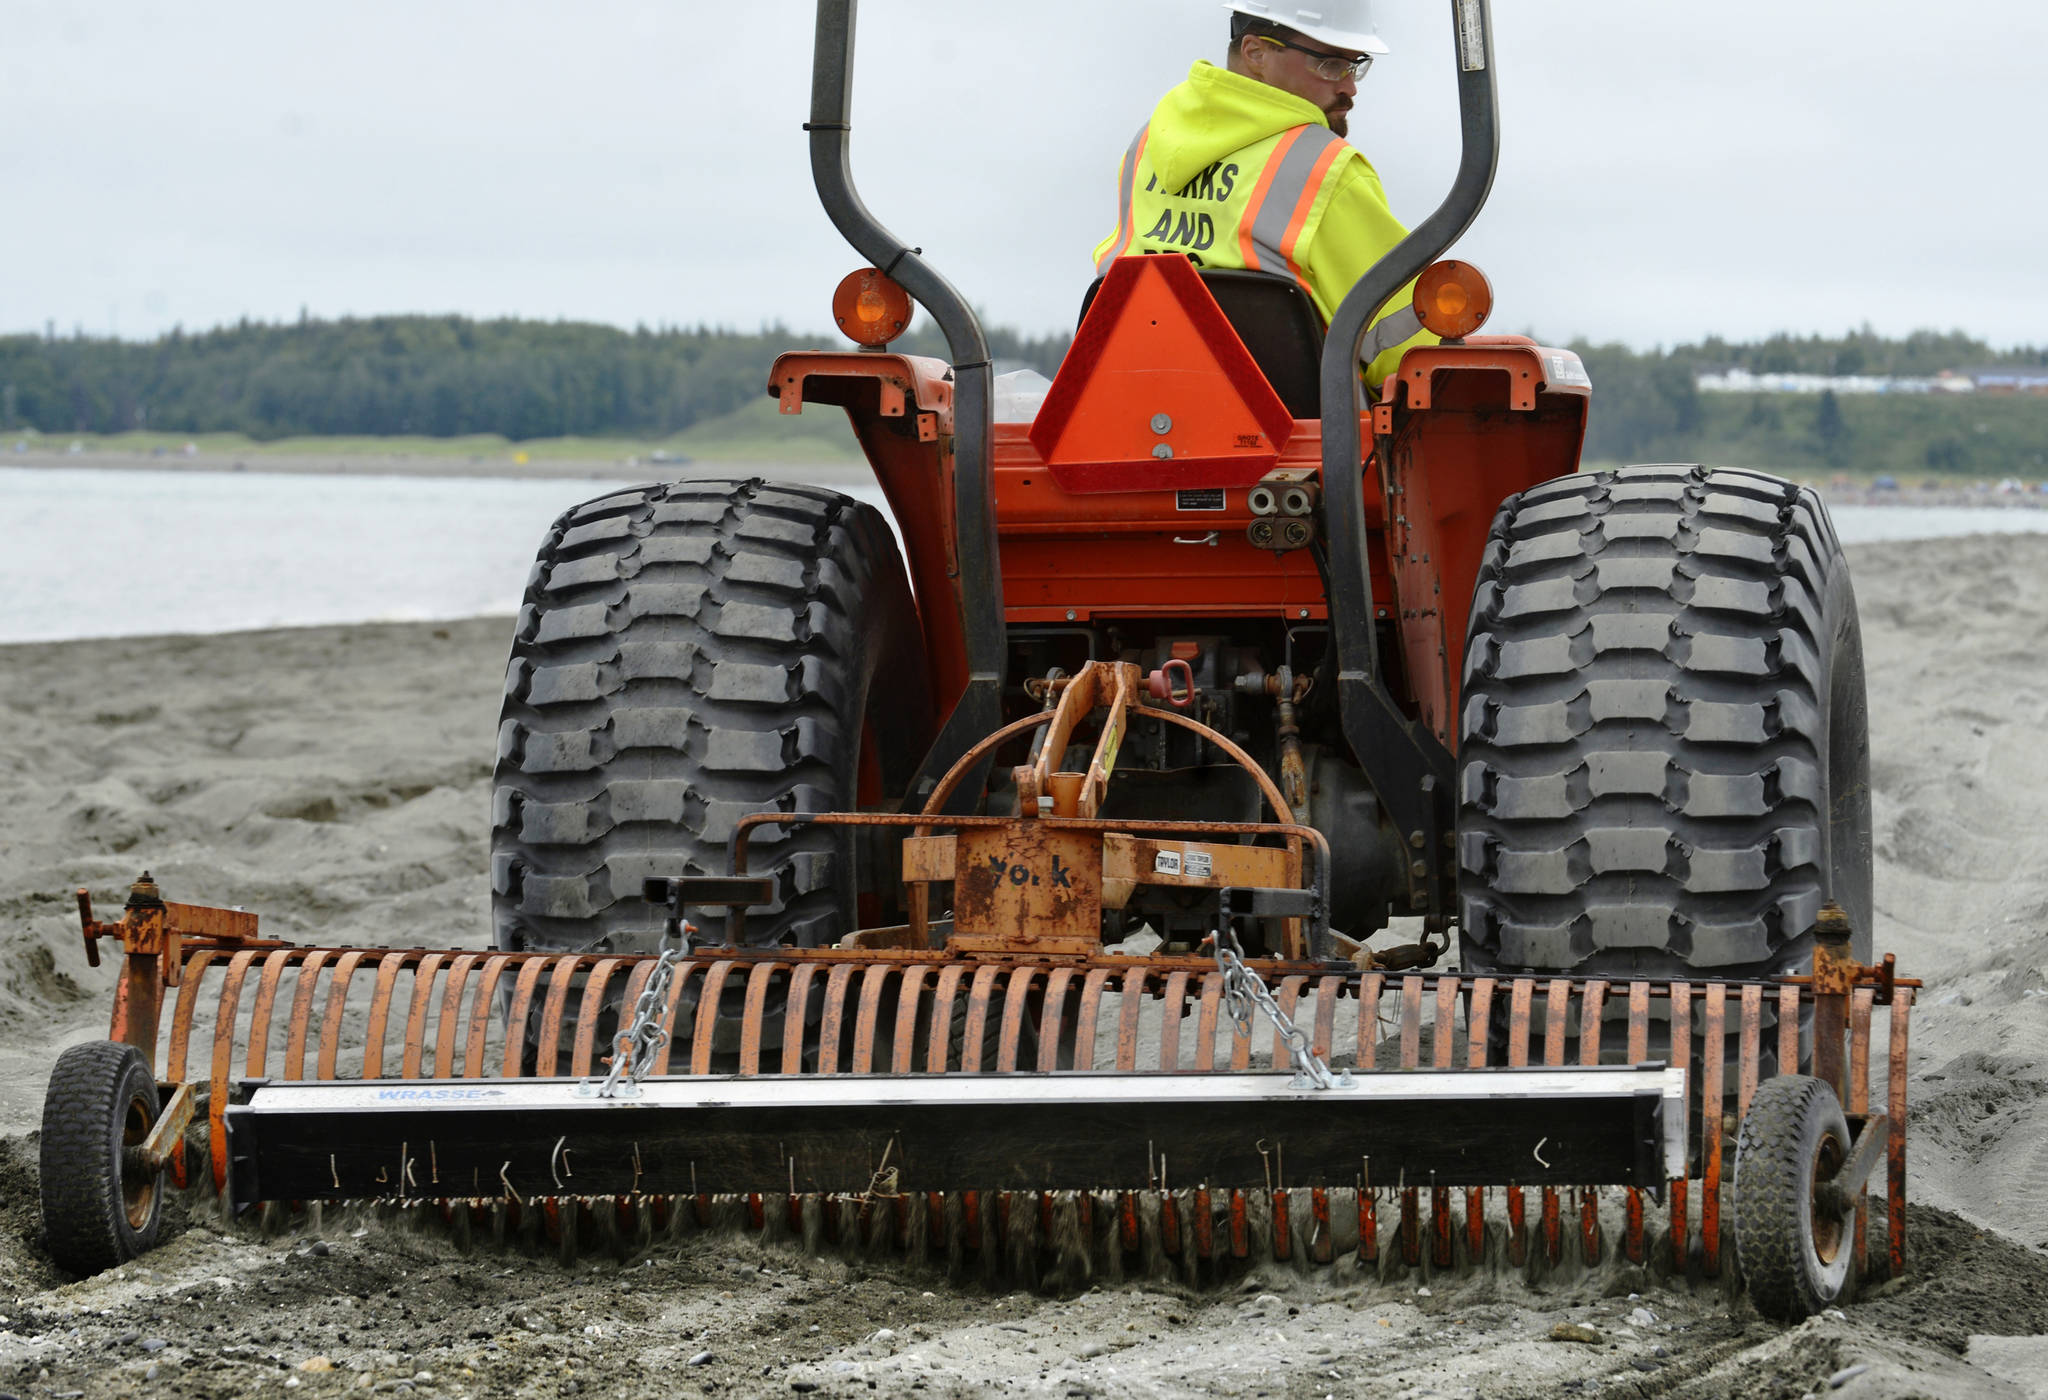 Kenai Parks and Recreation employee Jacob Hart rakes Kenai’s south beach to demonstrate how the magnetic bar hanging behind his rake picks up nails and other metal debris buried under the sand, on Friday, July 20, 2018 in Kenai, Alaska. The idea of using a magnetic rake to sweep up metal objects — left after many years of pallet bonfires, lost tent stakes, and general litter — came from Kenai Central High School sophmore Riley Graves, who created a magnetic leaf-rake prototype for this April’s Caring for the Kenai competition. Kenai Public Works Department shop foreman Randy Parrish built the rake after Graves’ idea, which he presented to the Kenai City Council on May 16. Since the July 10 beginning of this summer’s personal use dipnet fishery, Hart said the rake’s been deployed every evening. “When you drive over a dark spot in the sand, where you can tell it’s been a fire pit, you can hear the nails going tink, tink, tink,” he said. (Ben Boettger/Peninsula Clarion)